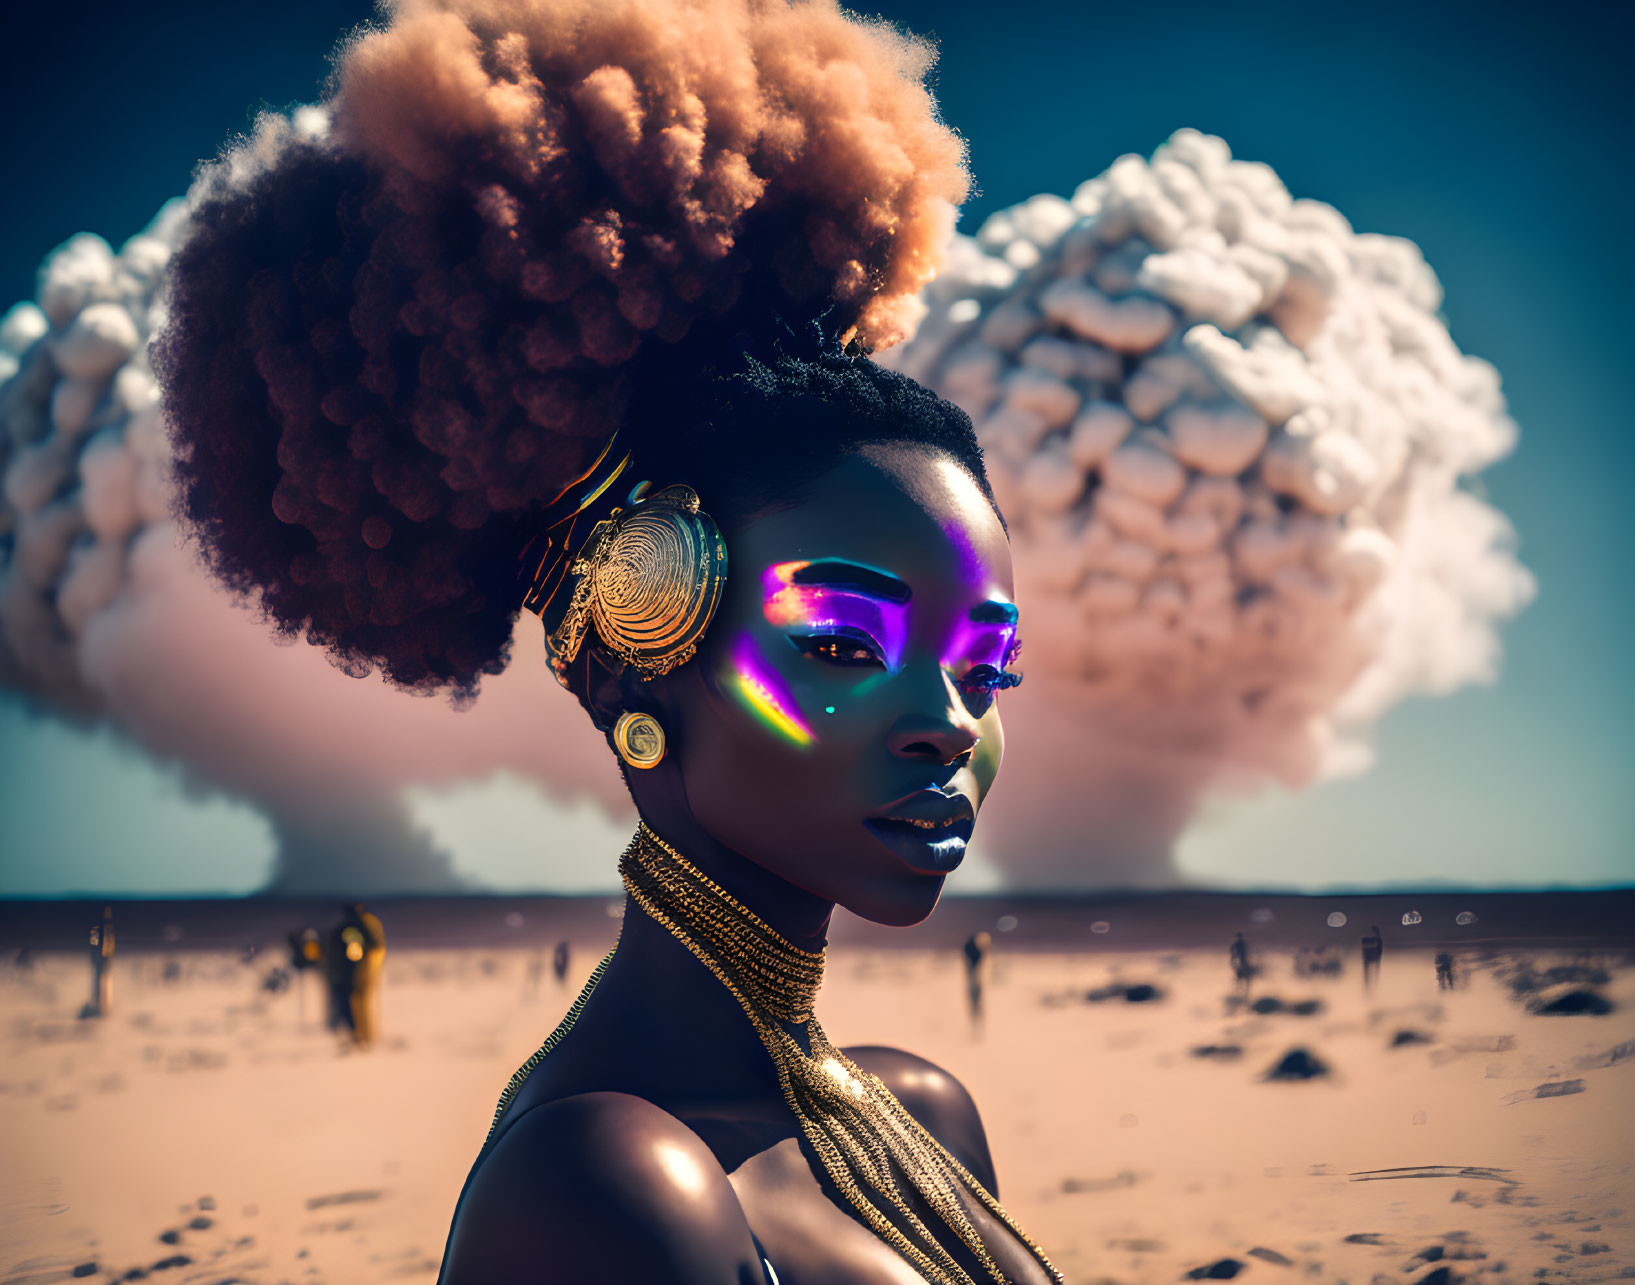 Vibrant digital portrait of an African woman with afro hairstyle in surreal desert setting